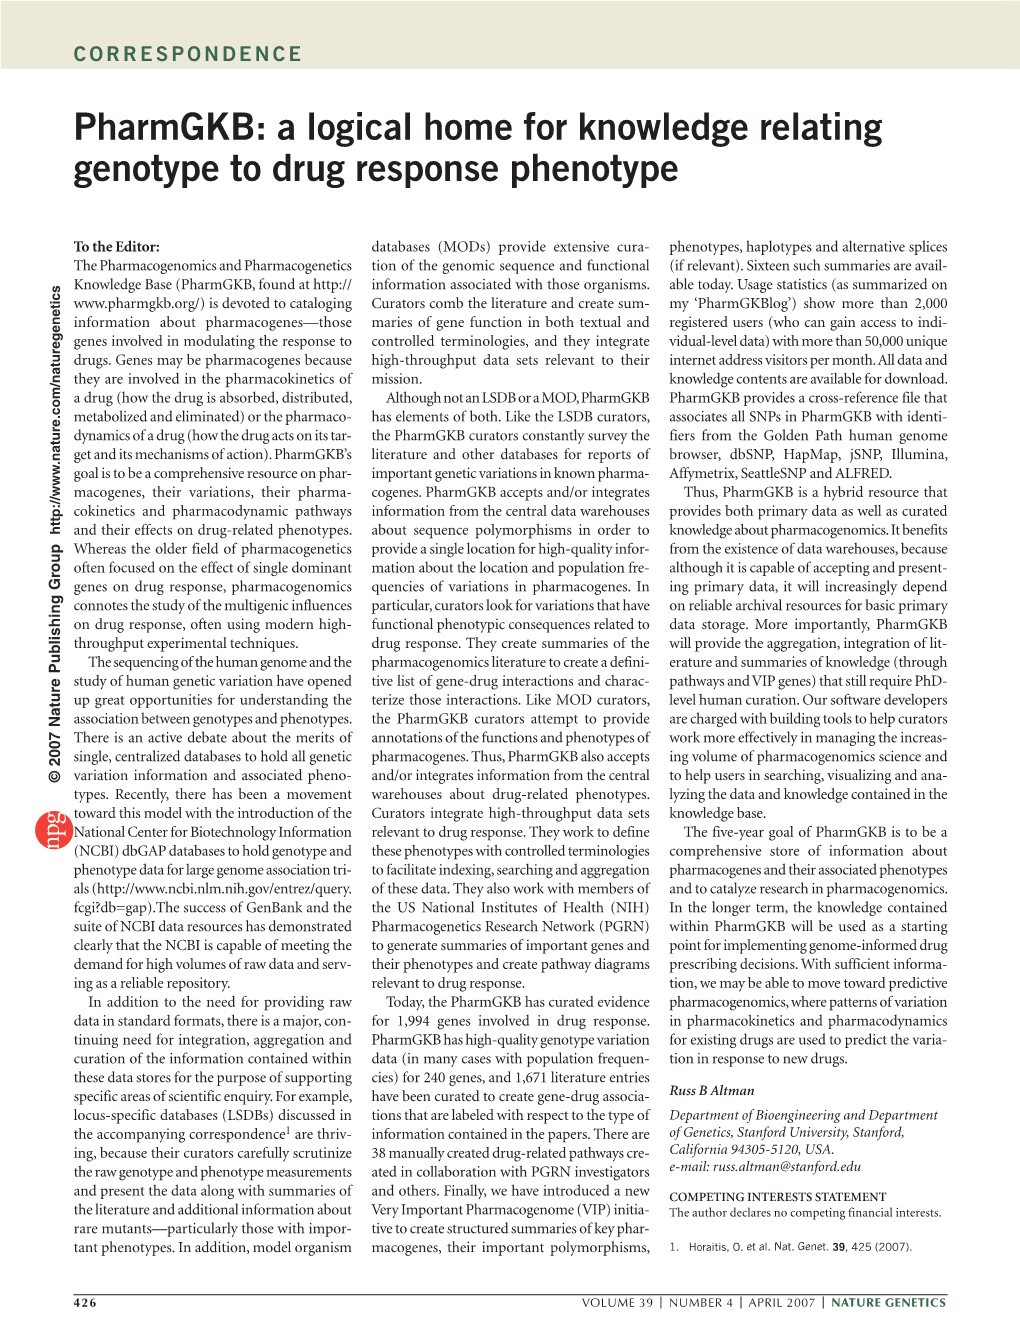 A Logical Home for Knowledge Relating Genotype to Drug Response Phenotype